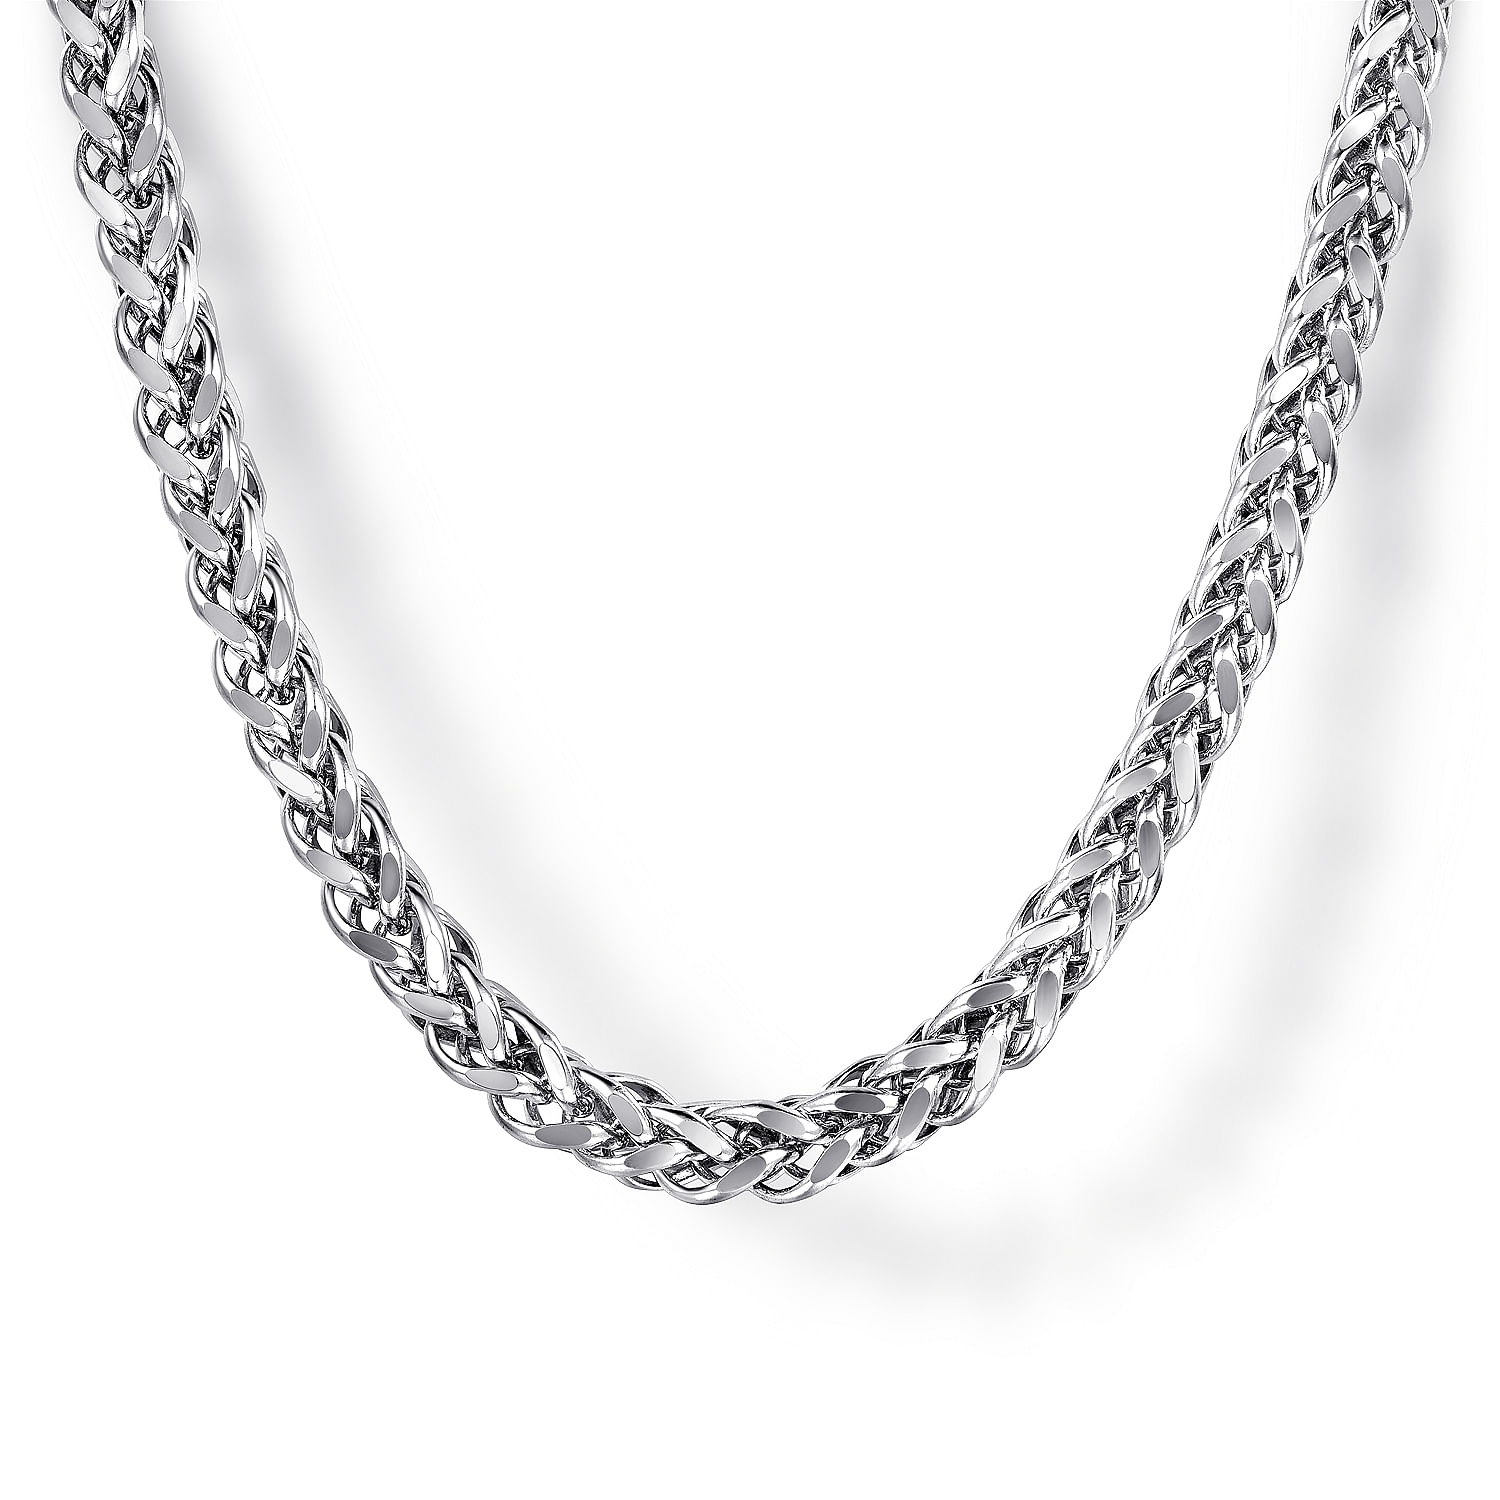 22 Inch 925 Sterling Silver Solid Men's Wheat Chain Necklace 